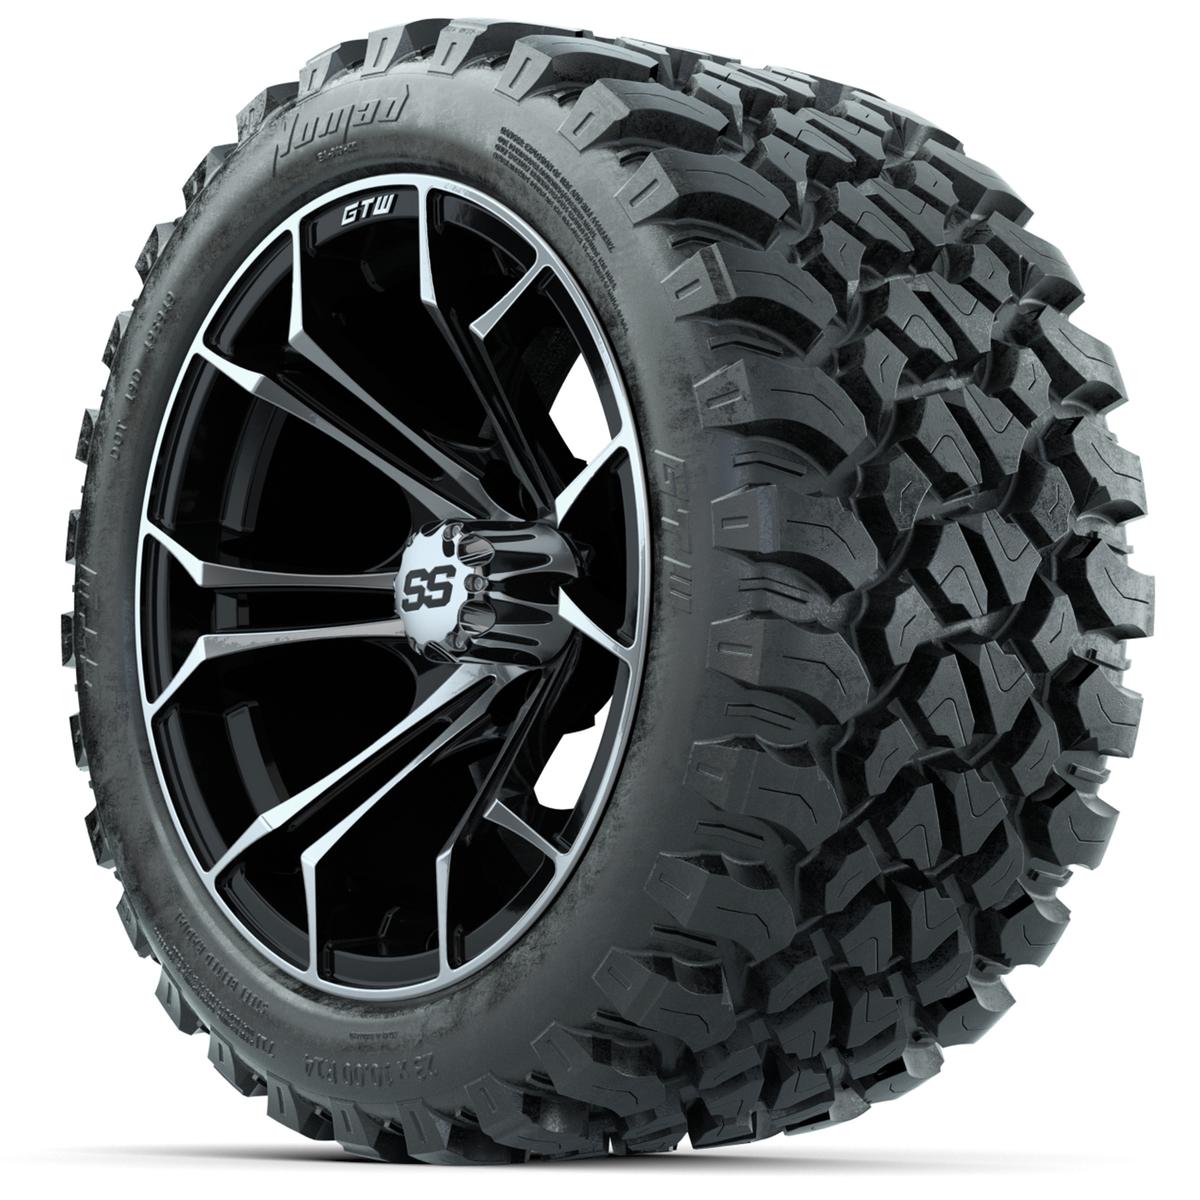 GTW Spyder Machined/Black 14 in Wheels with 23x10-14 GTW Nomad All-Terrain Tires – Full Set